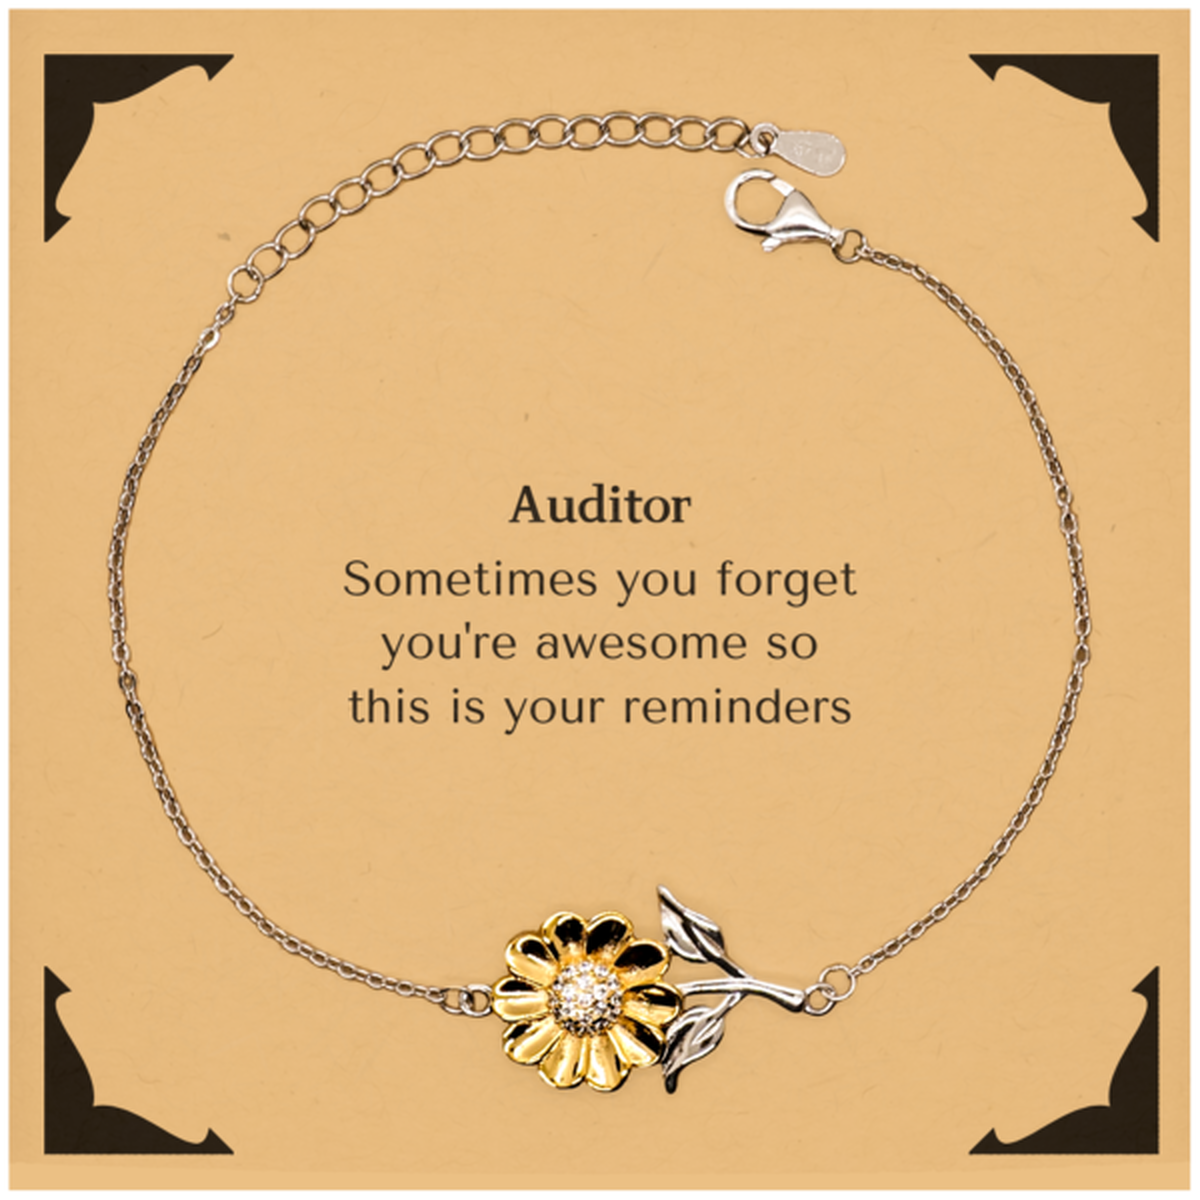 Sentimental Auditor Sunflower Bracelet, Auditor Sometimes you forget you're awesome so this is your reminders, Graduation Christmas Birthday Gifts for Auditor, Men, Women, Coworkers